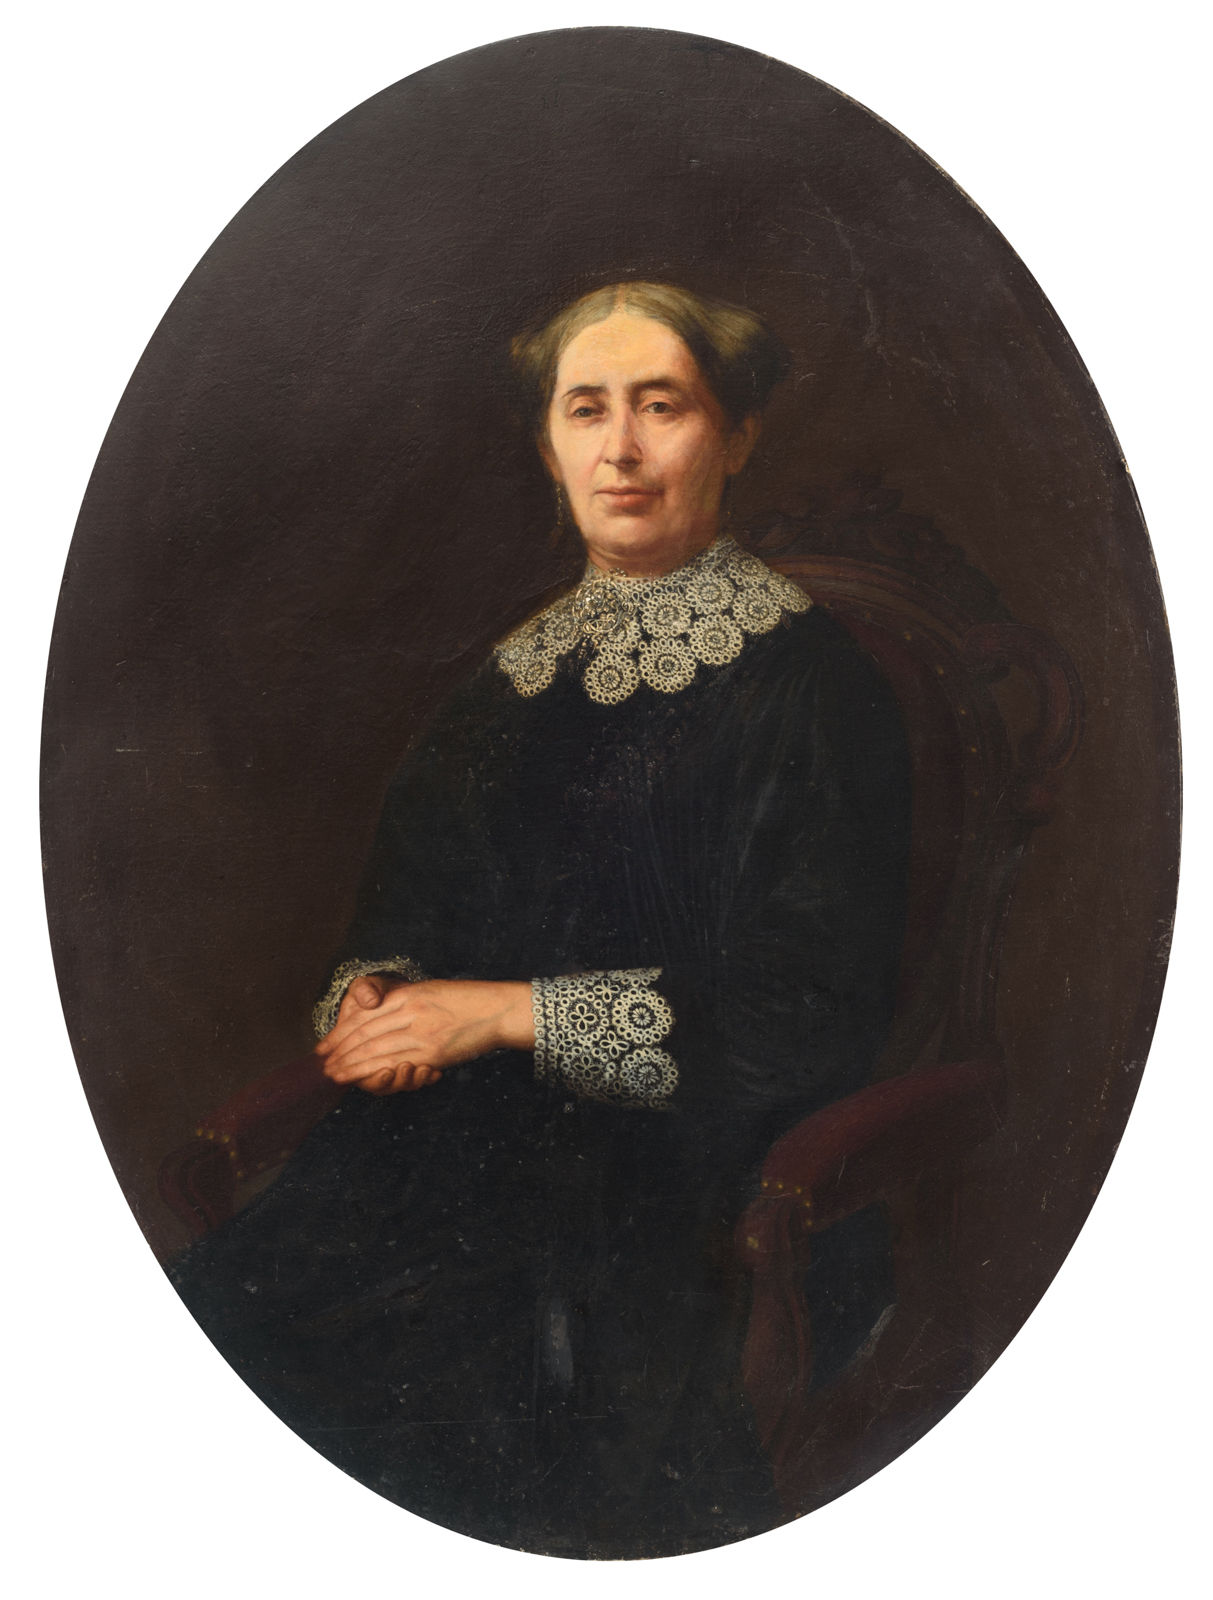 No visible signature, the portrait of a lady, 19thC, oil on canvas, 91 x 122 cm